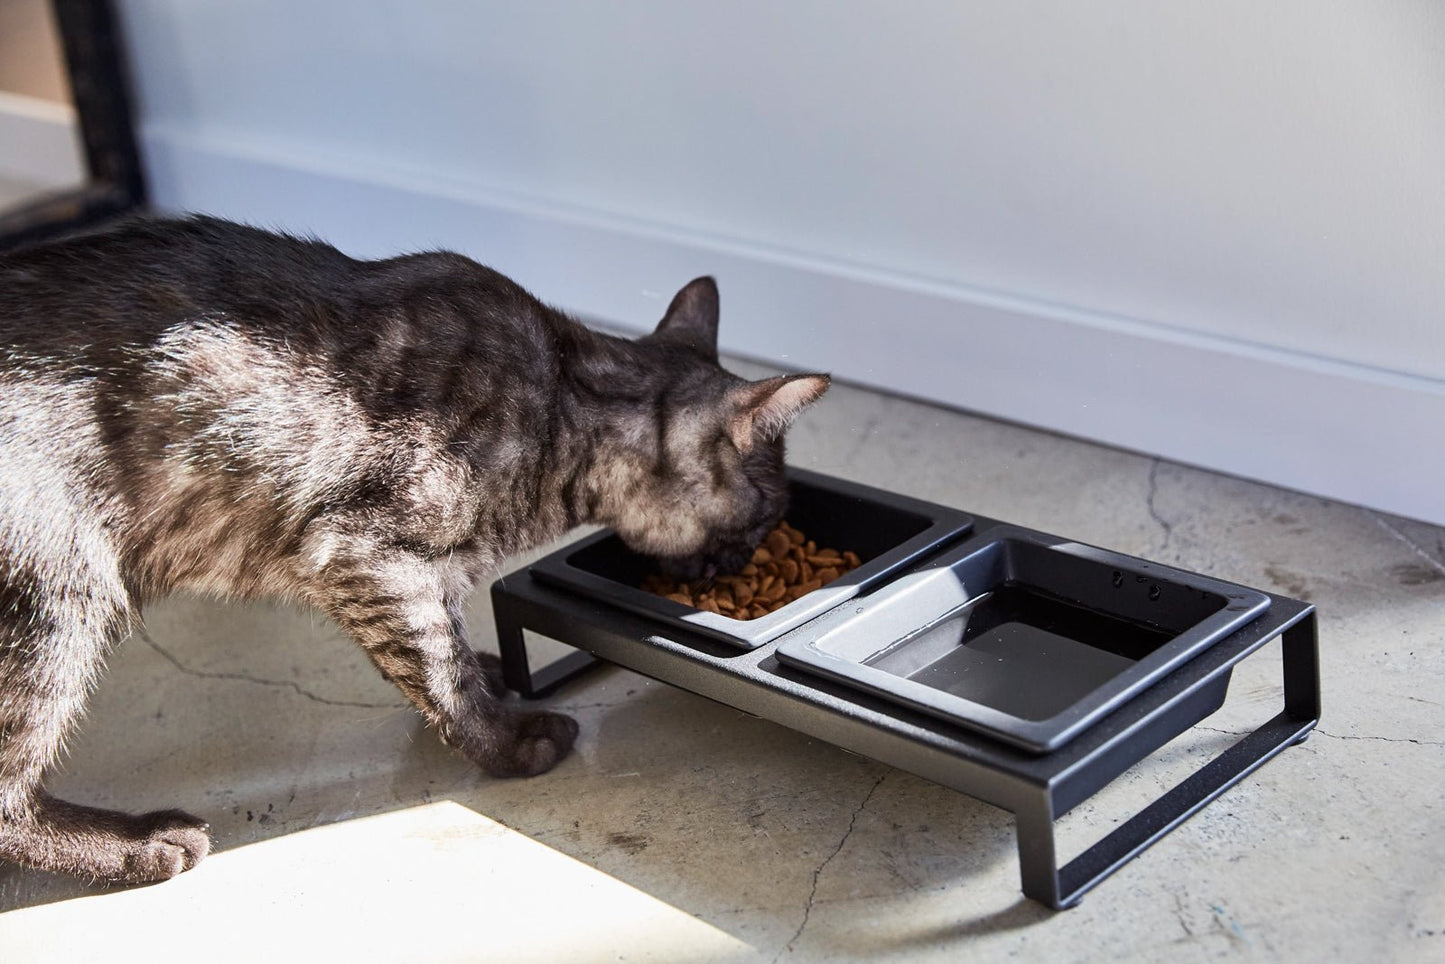 A gray cat eating from a black ceramic Yamazaki Home pet food bowl.